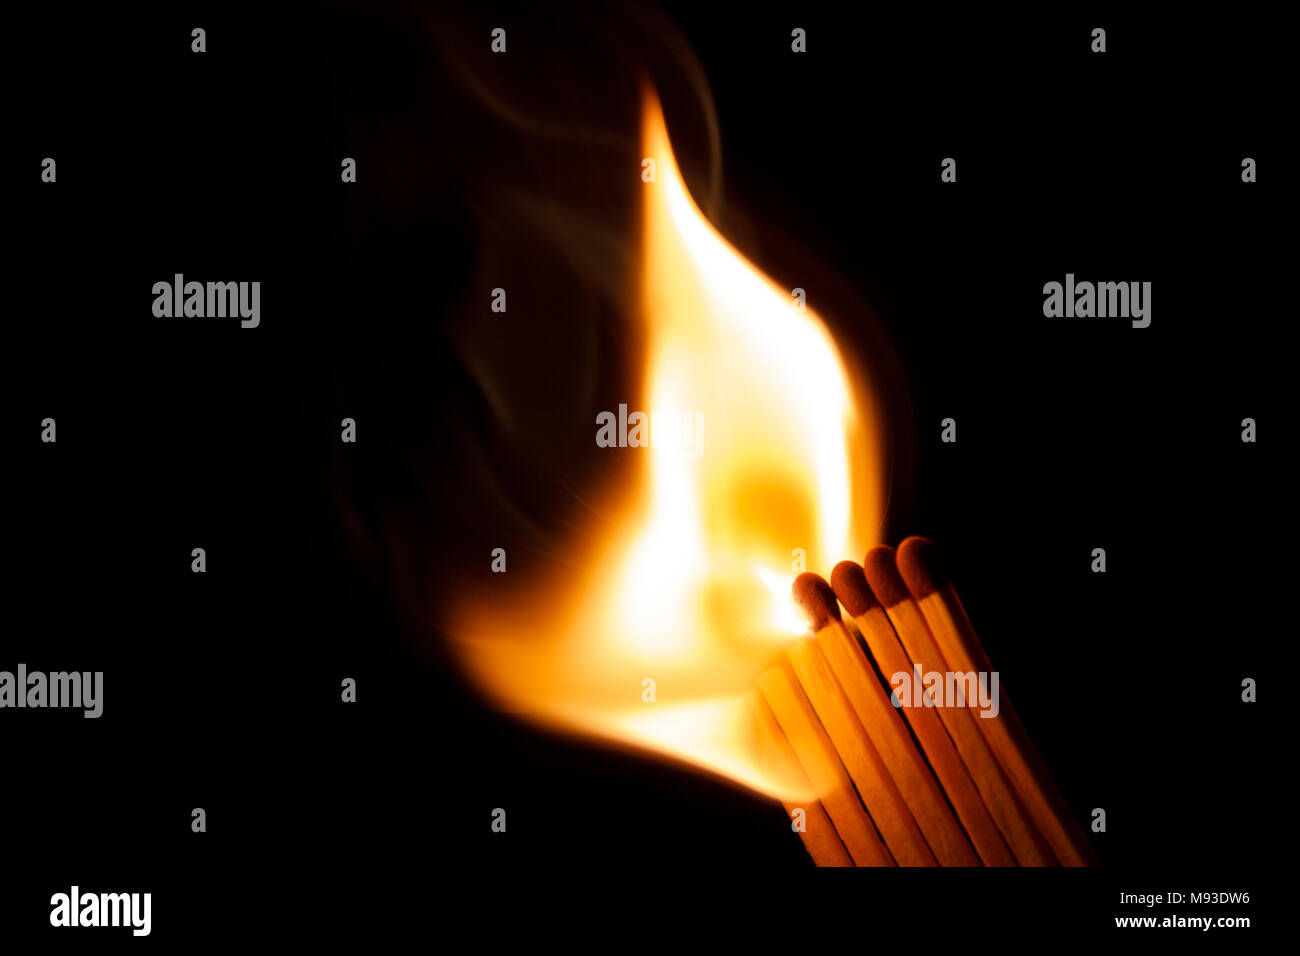 A row of matches is being ignited, spreading the fire Stock Photo